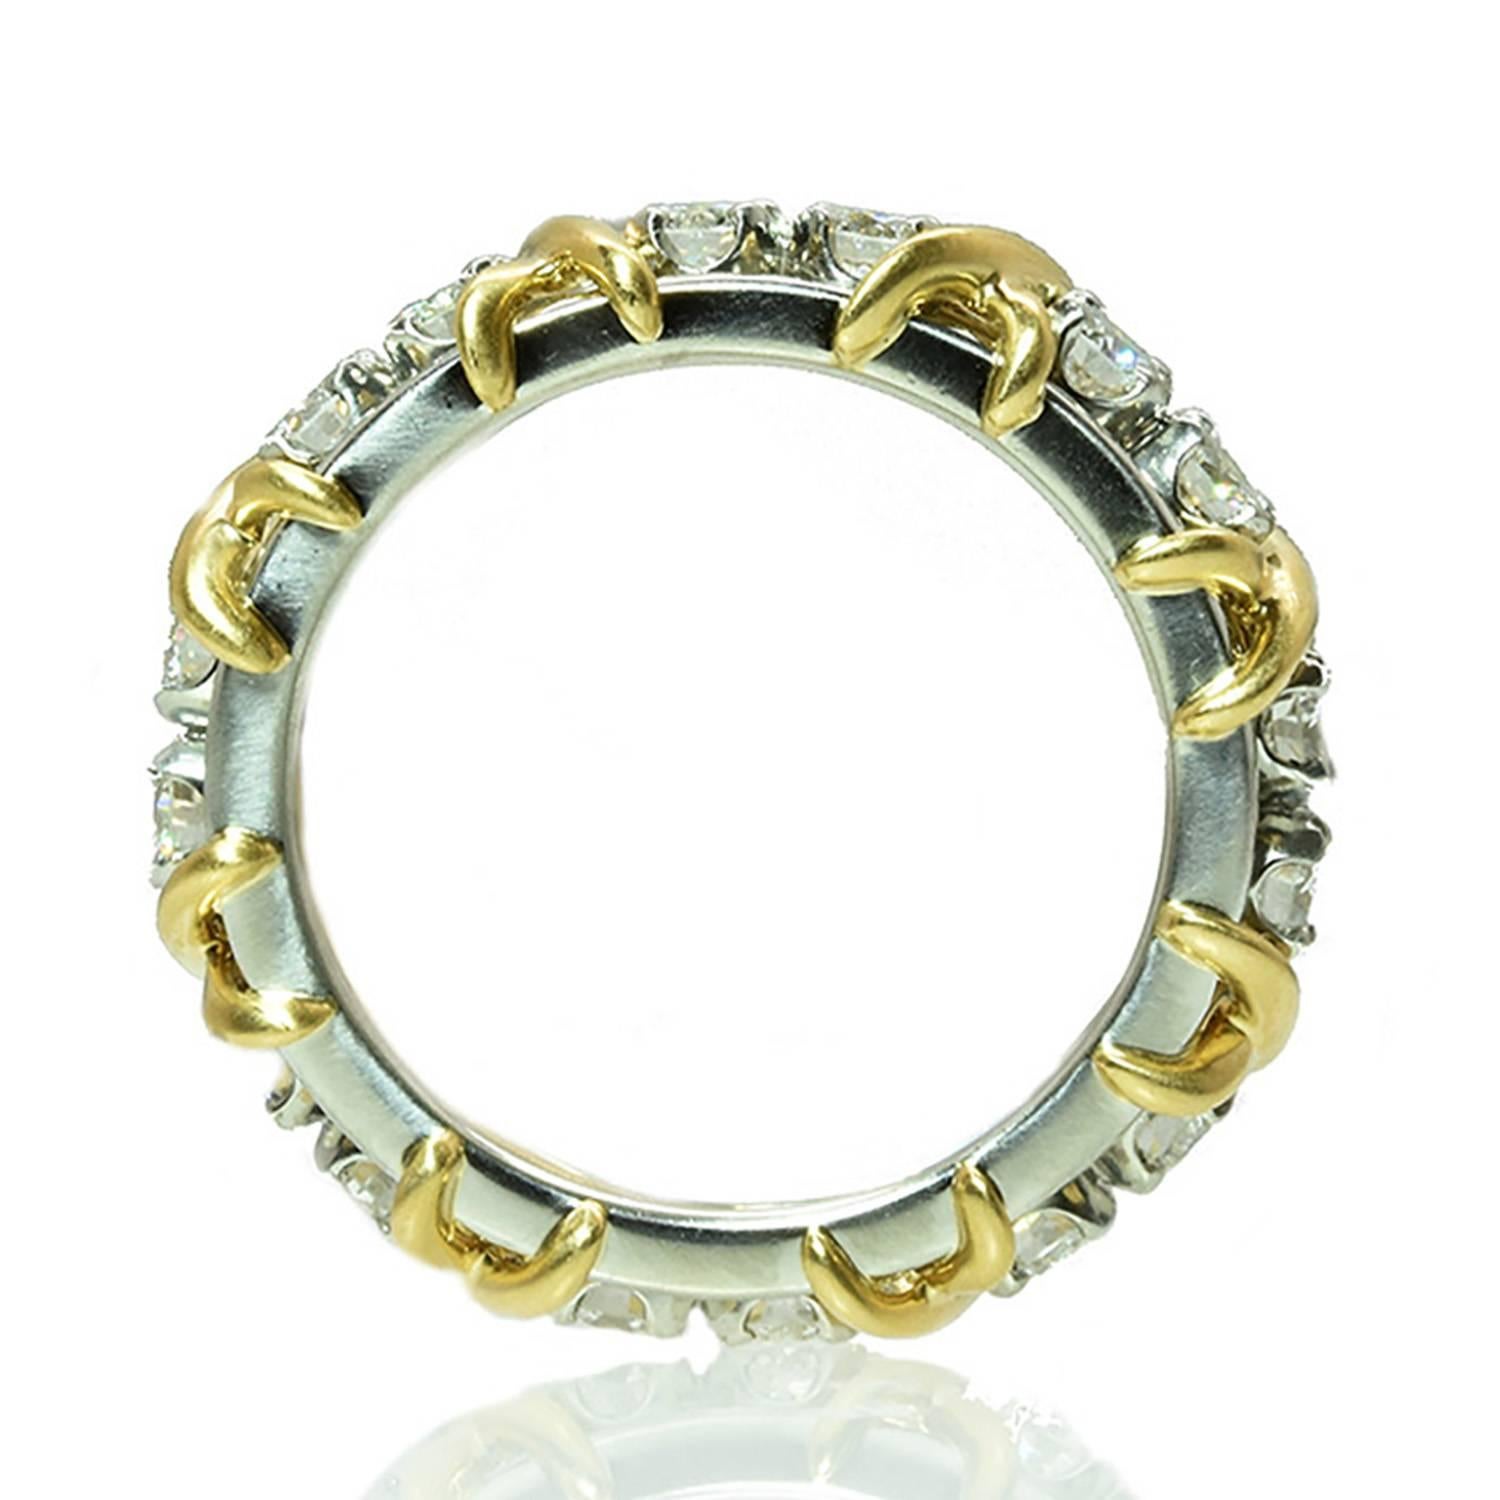 A classic sixteen stone ring by Jean Schlumberger for Tiffany & Co. The ring features 16 round brilliant cut diamonds totaling approximately 1.12 carats. The ring is platinum and 18k Yellow Gold, and signed by Tiffany & Co. Size 4 3/4.